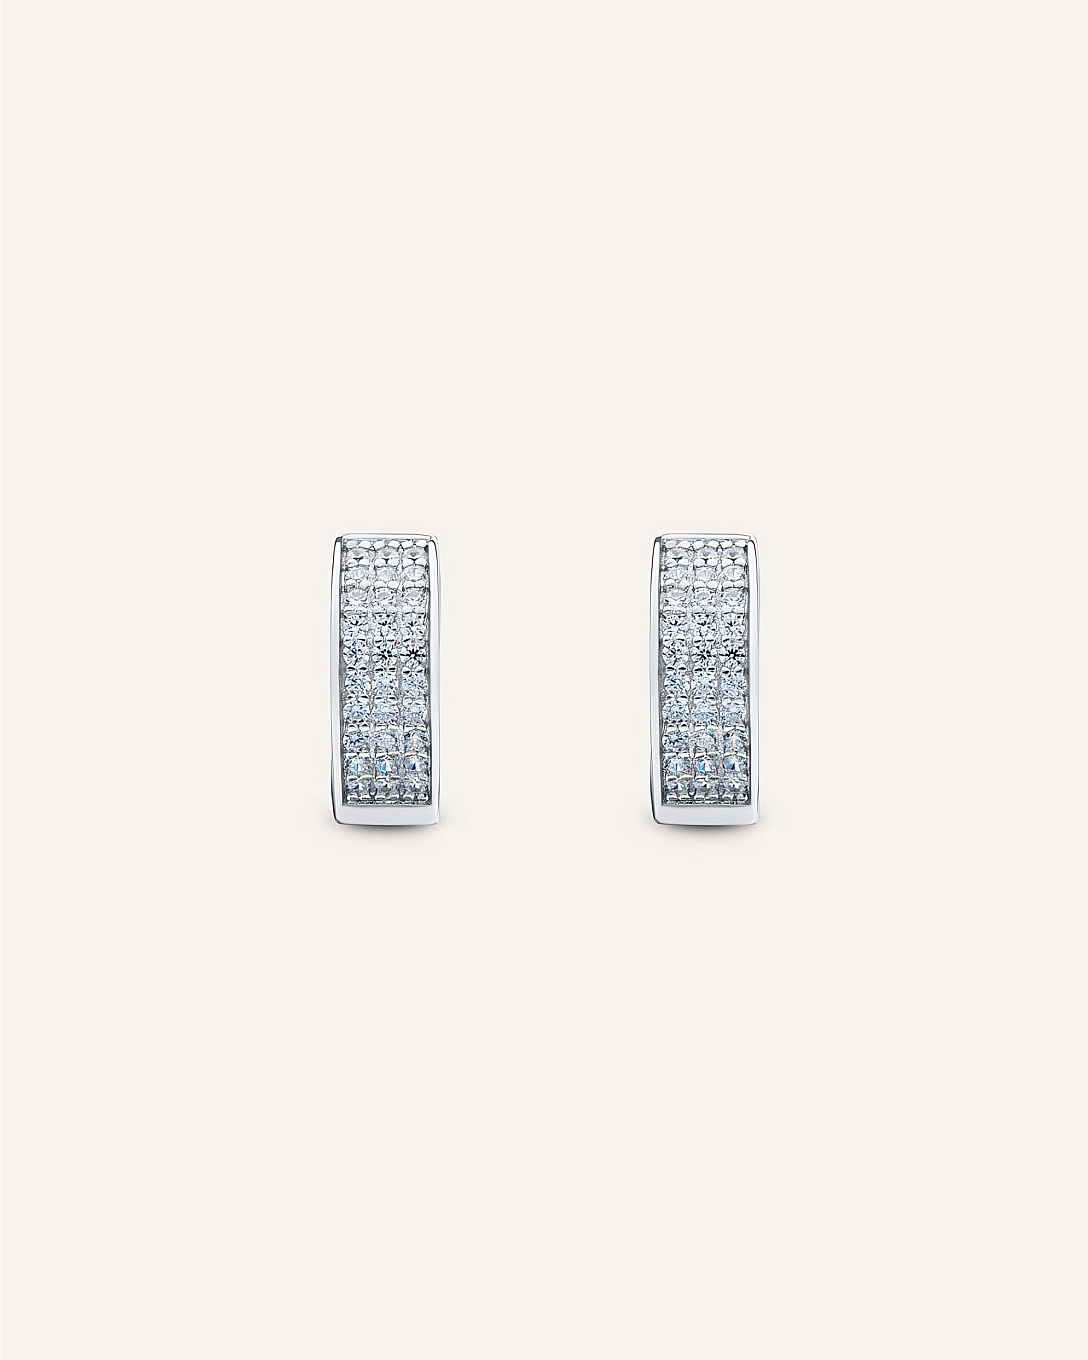 Silver earrings with Cubic Zirconia